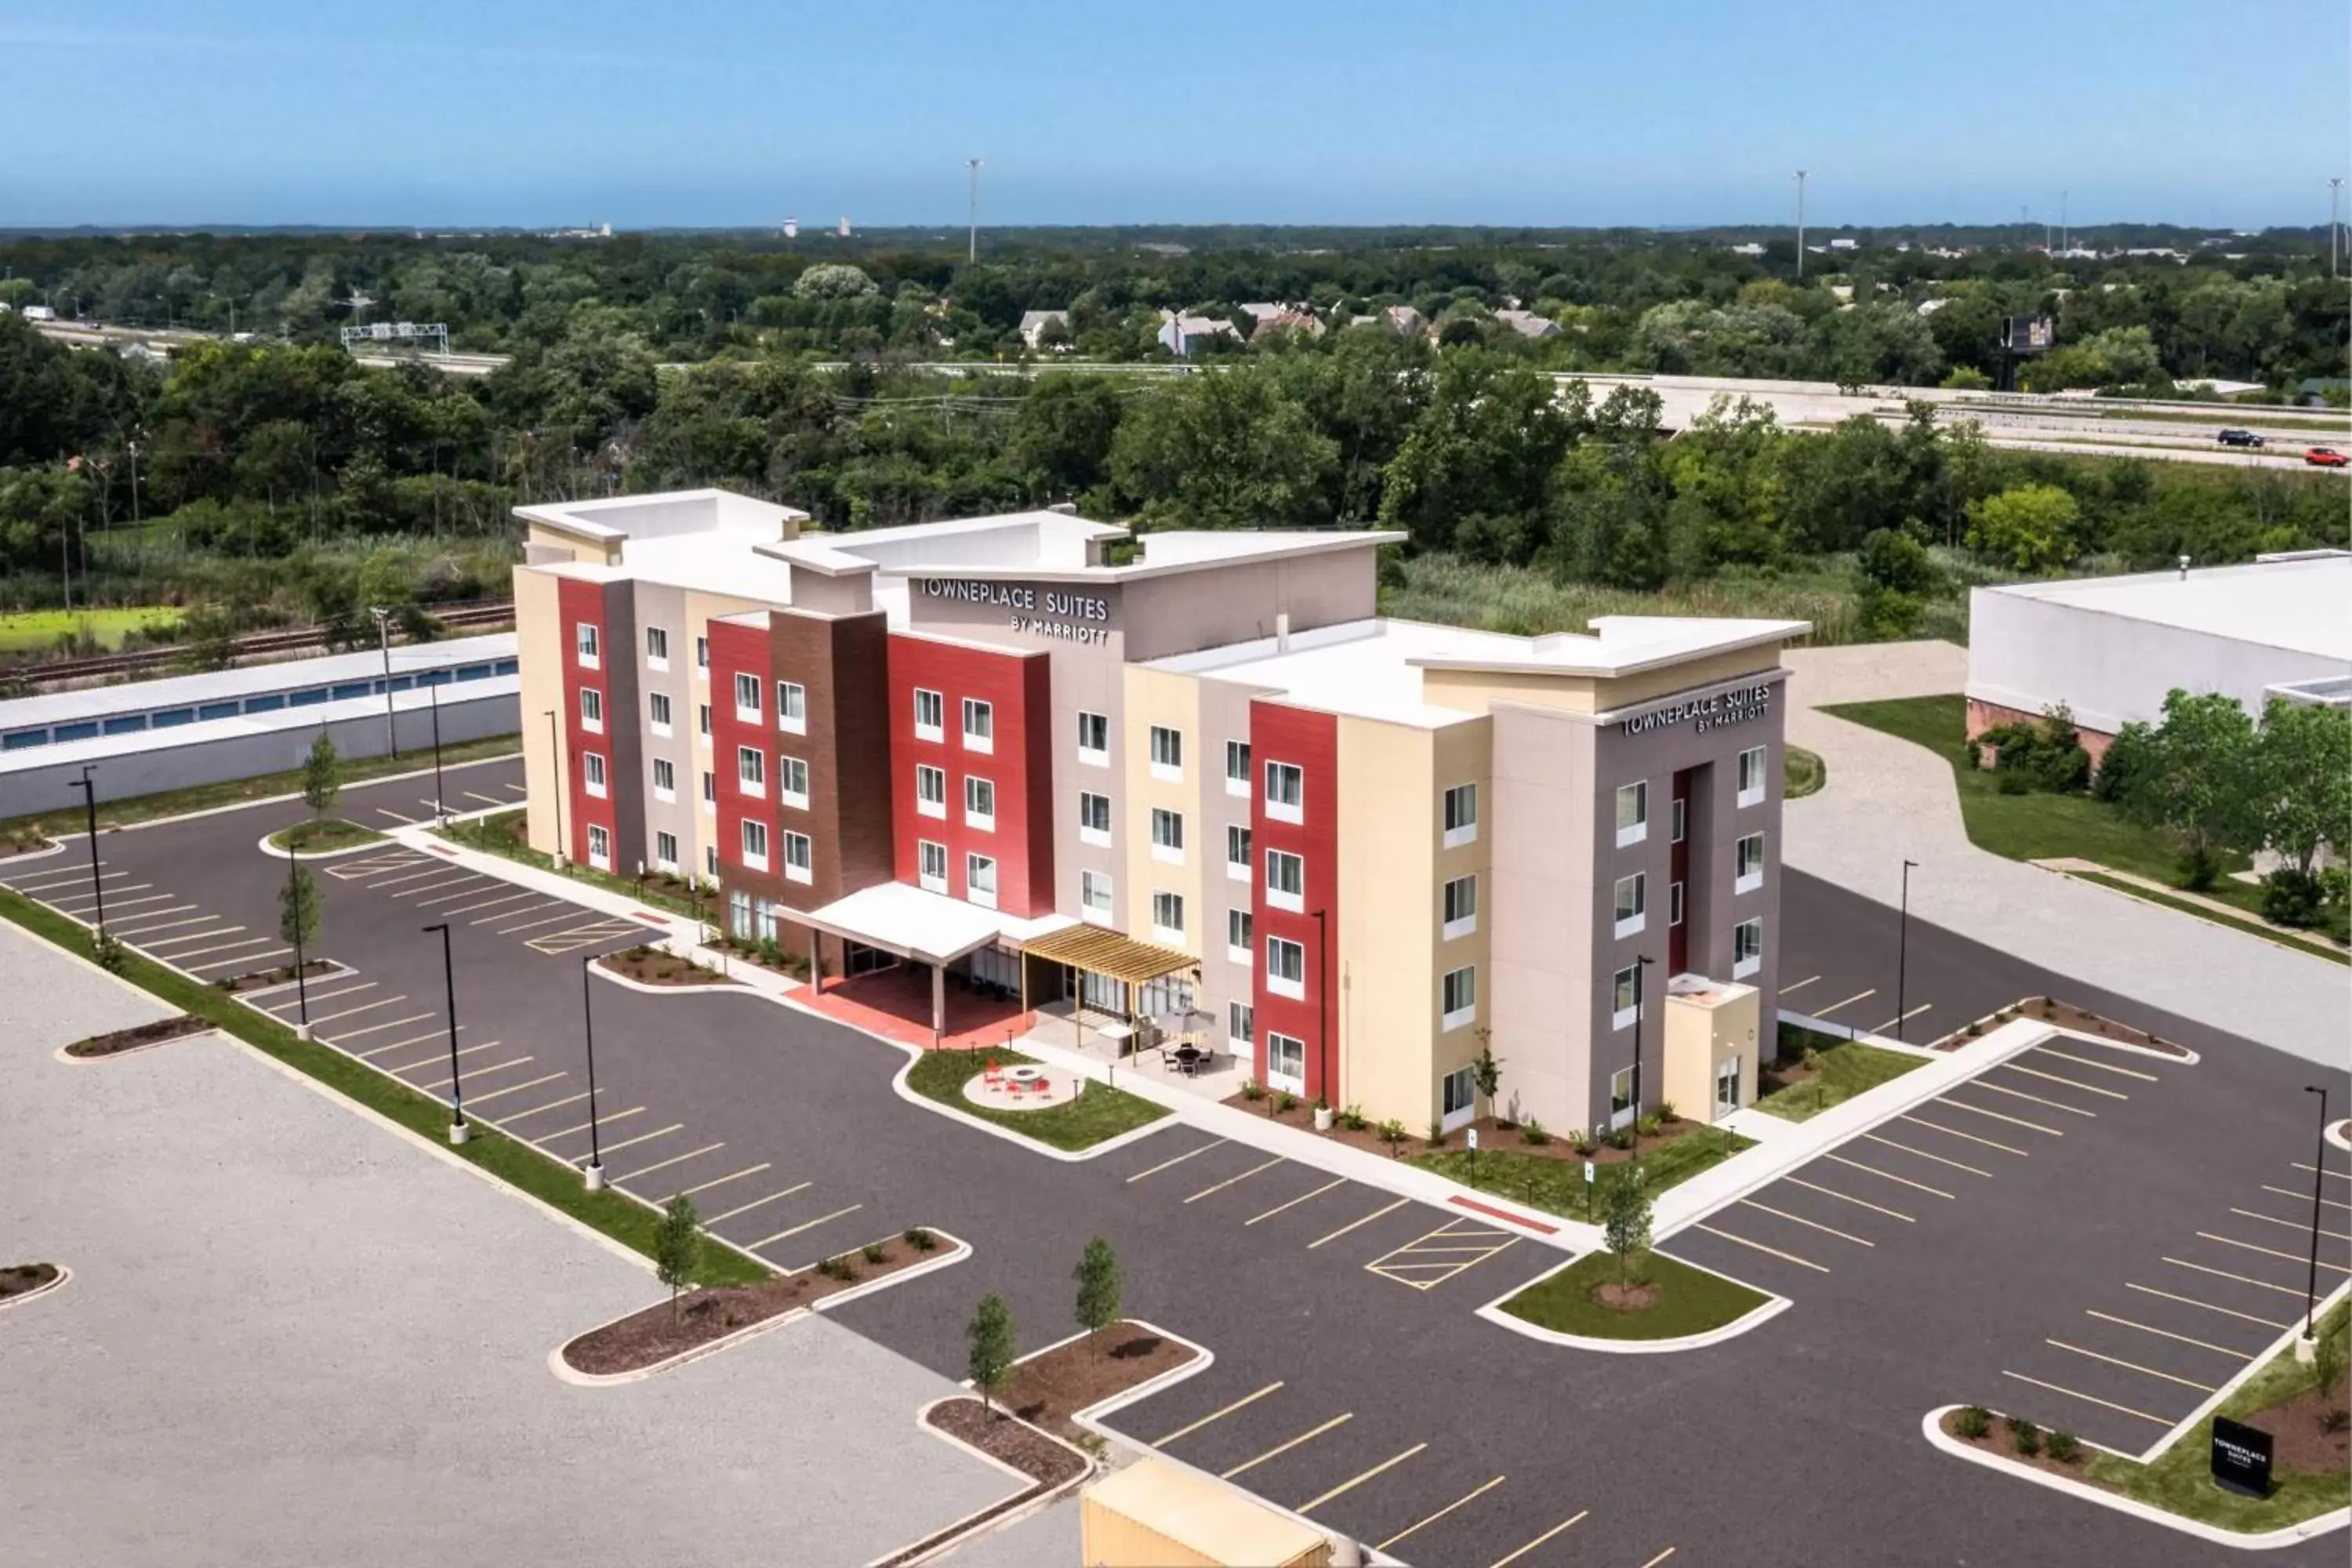 Property building, Bird's-eye View in TownePlace Suites by Marriott Chicago Waukegan Gurnee